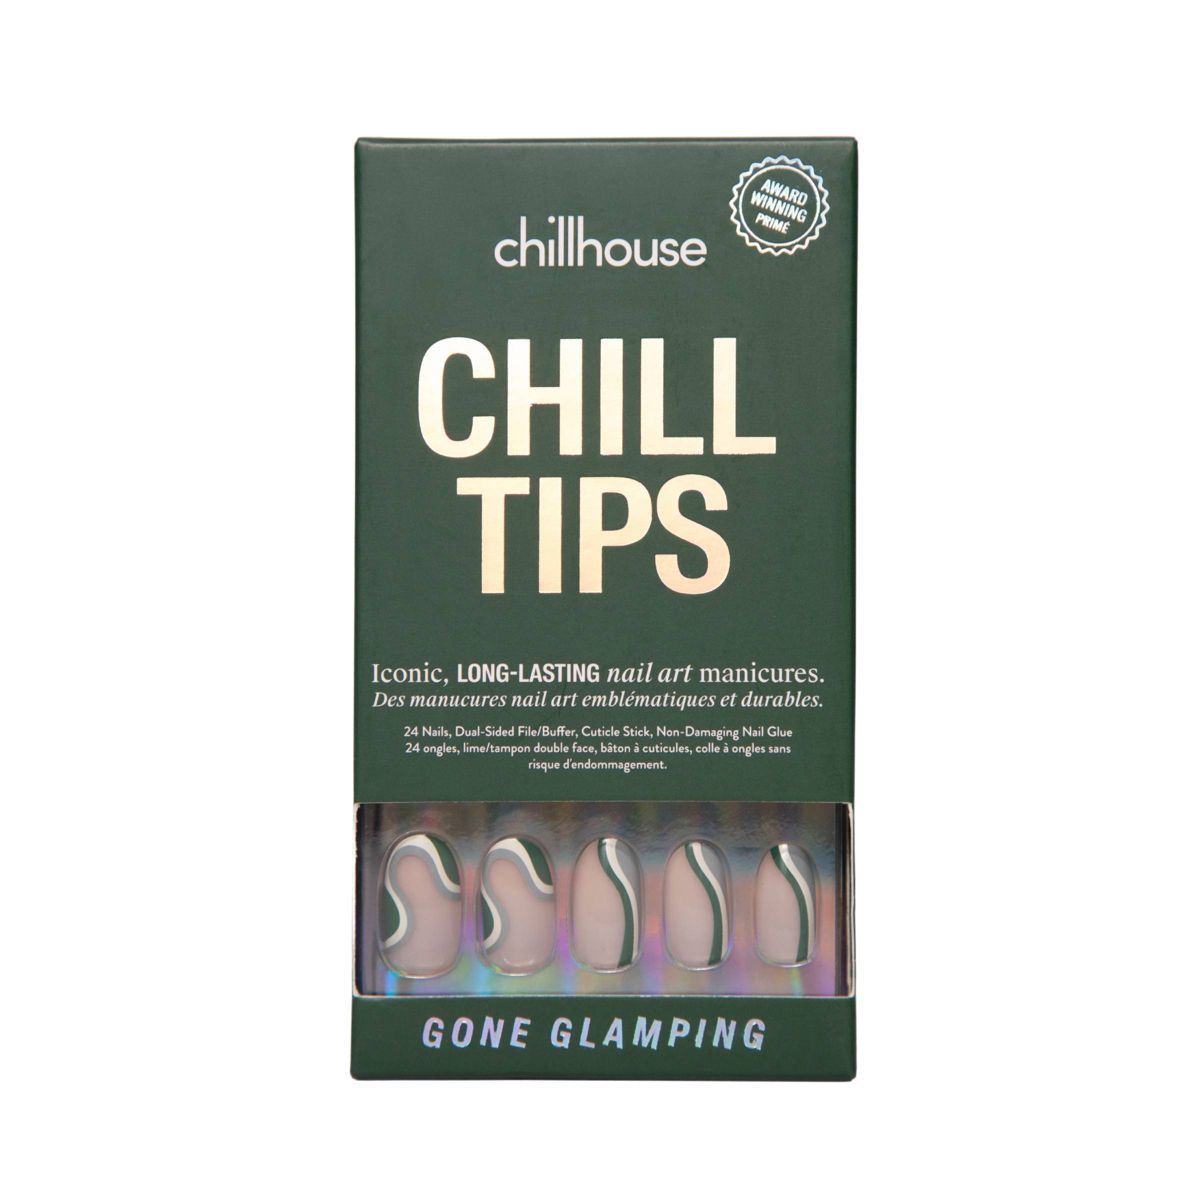 Chillhouse Chill Tips Nail Art Press On Fake Nails - Gone Glamping - 24ct | Target